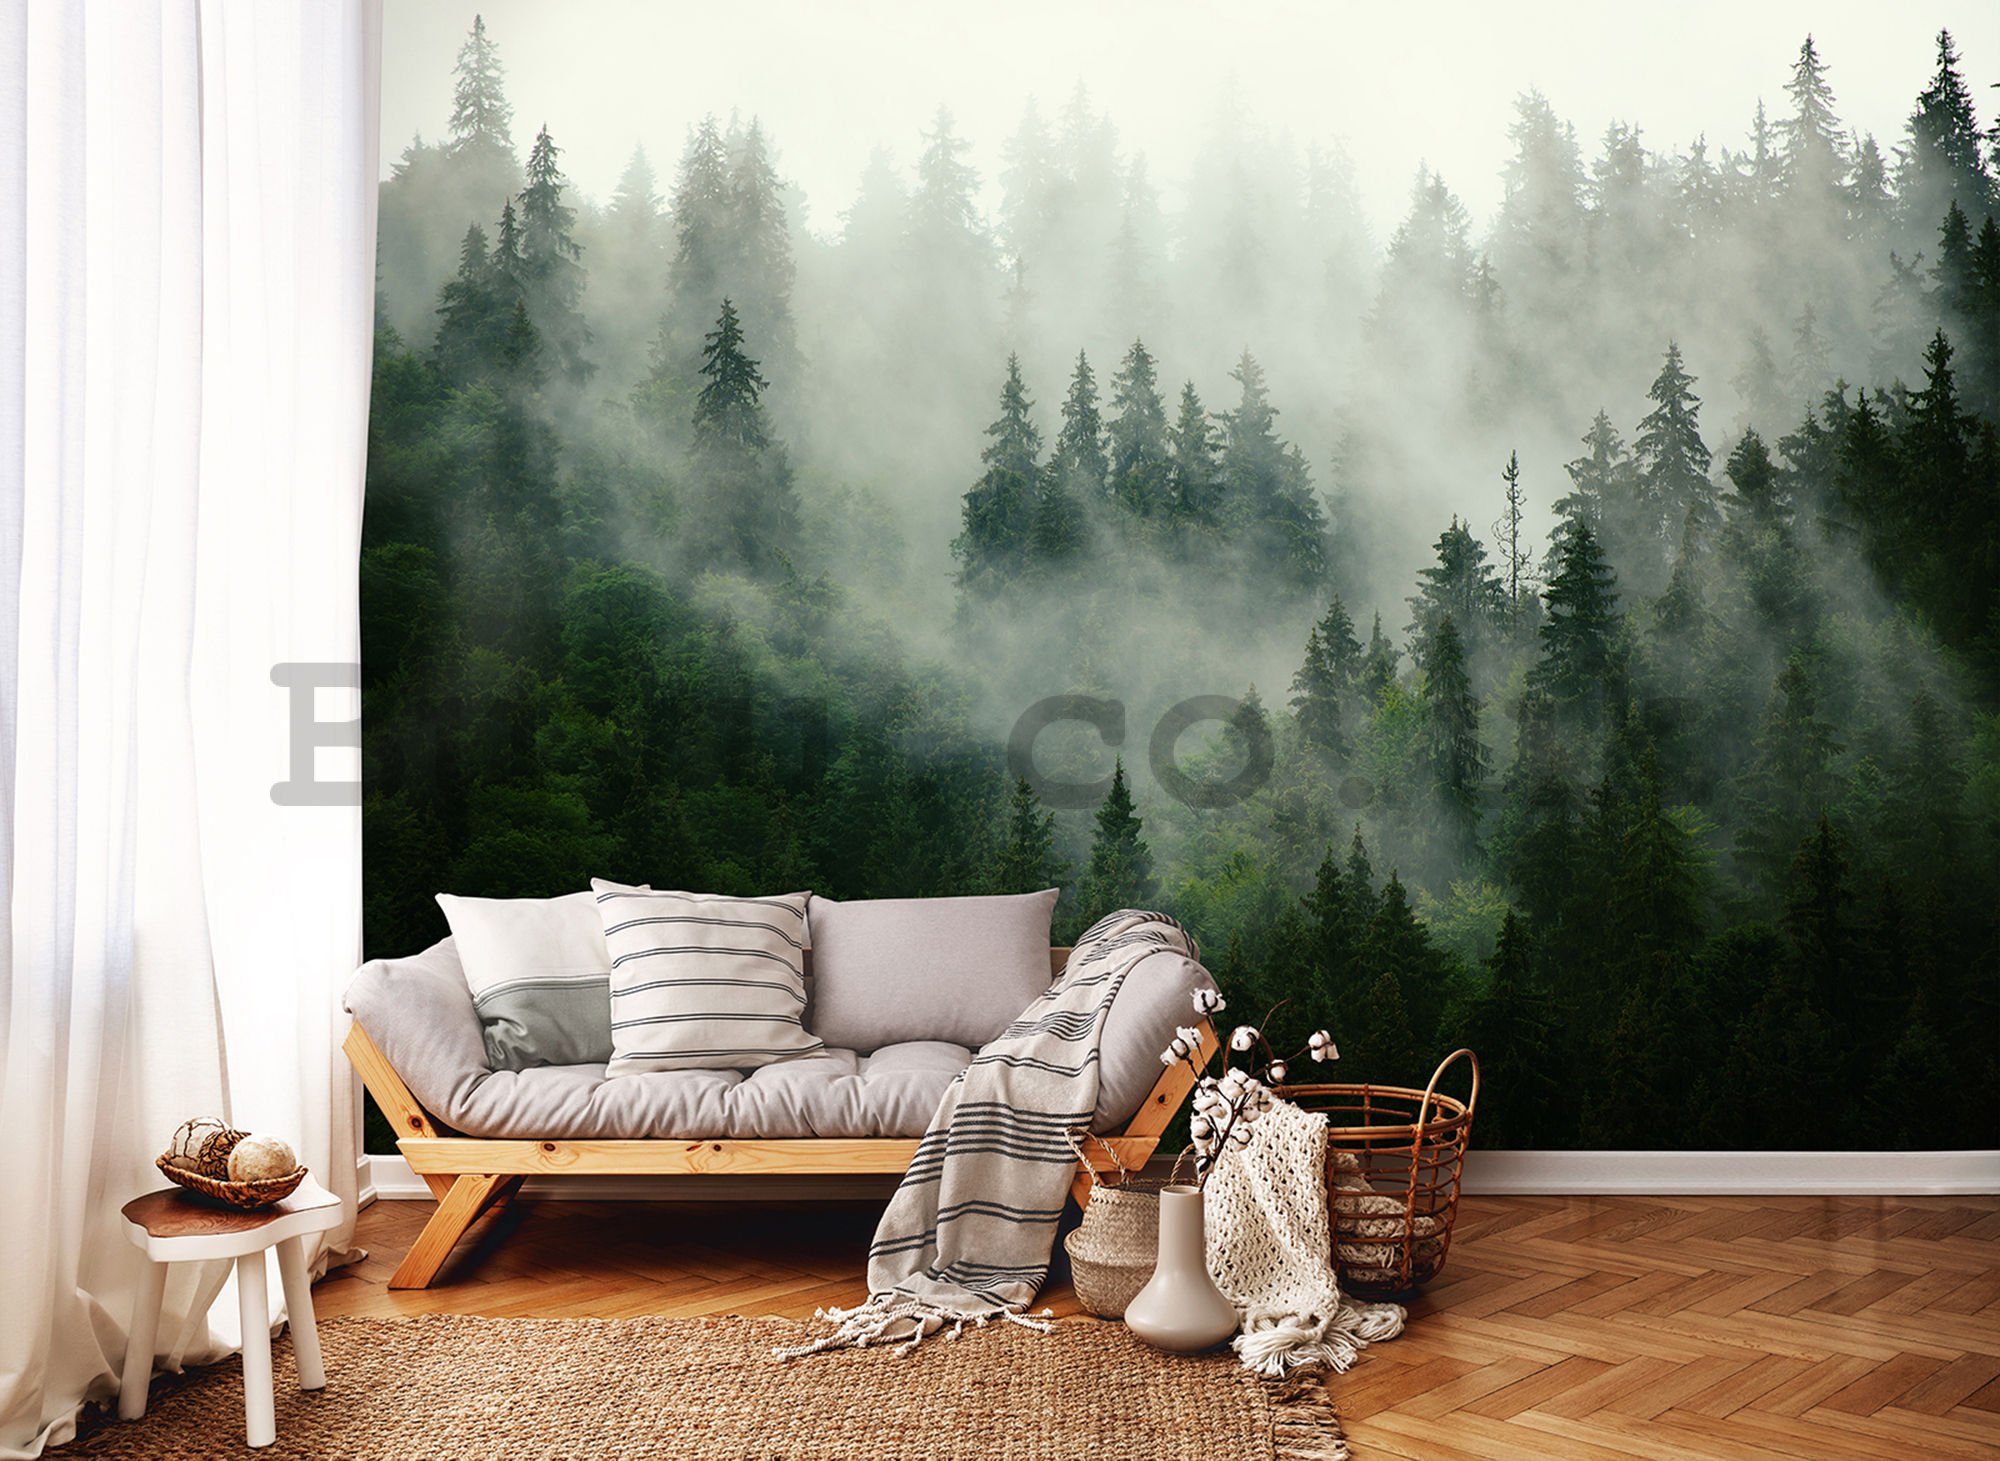 Wall mural vlies: Fog over the forest (1) - 416x254 cm